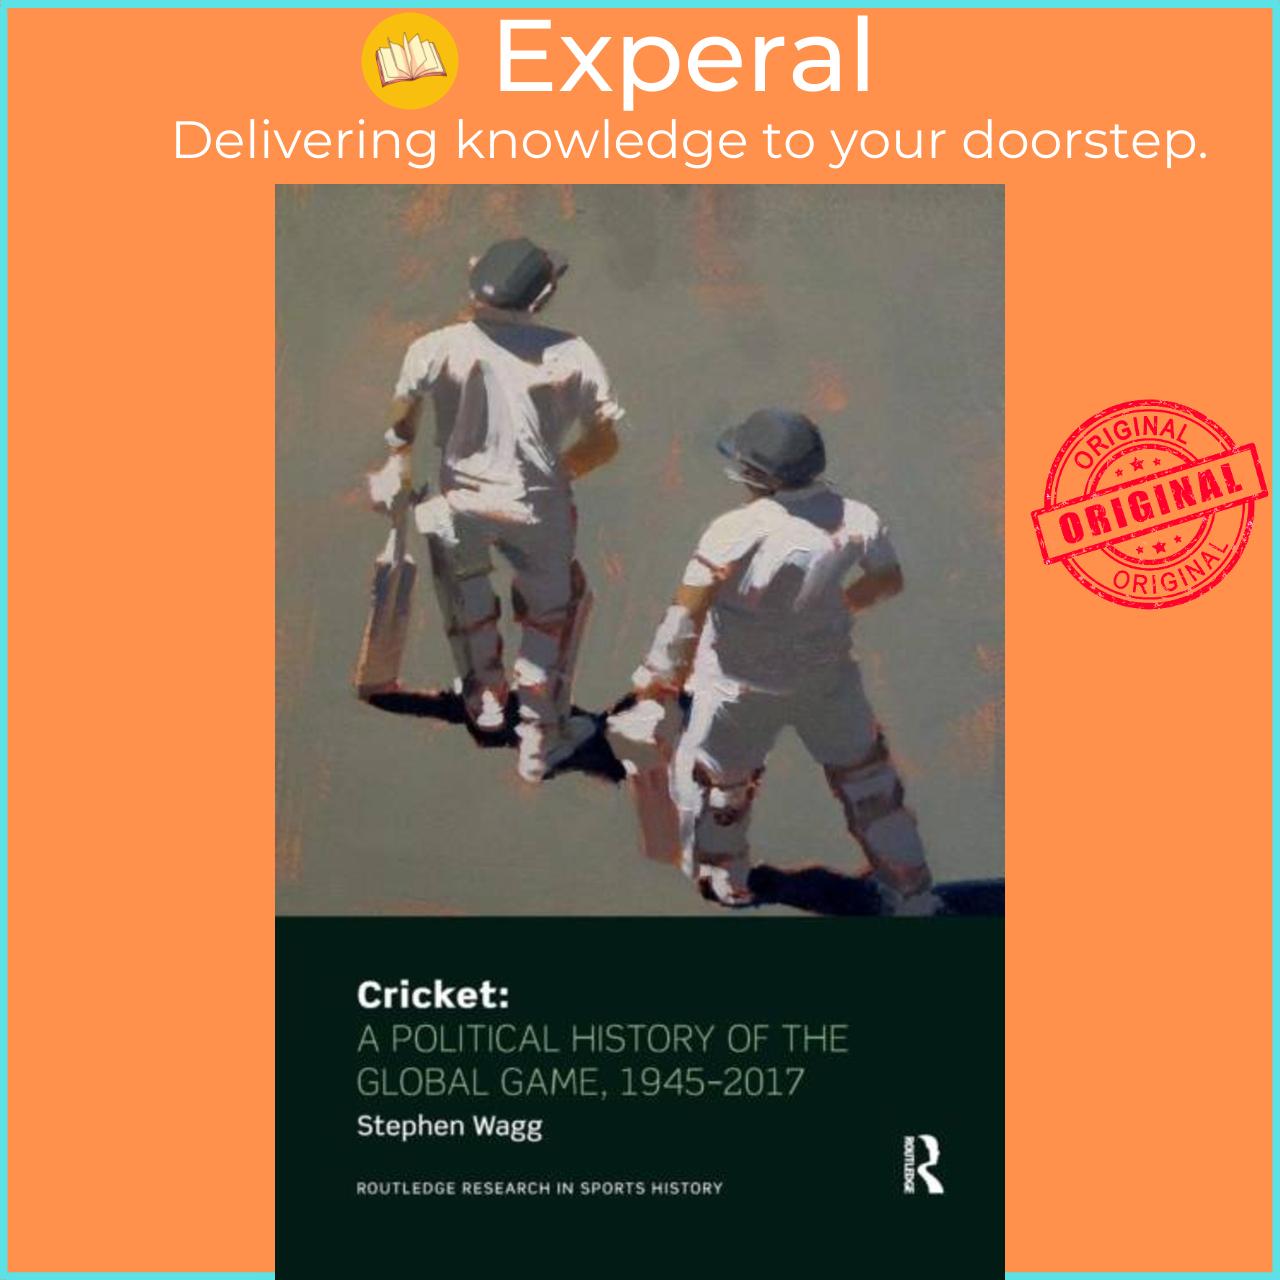 Sách - Cricket: A Political History of the Global Game, 1945-2017 by Stephen Wagg (UK edition, paperback)